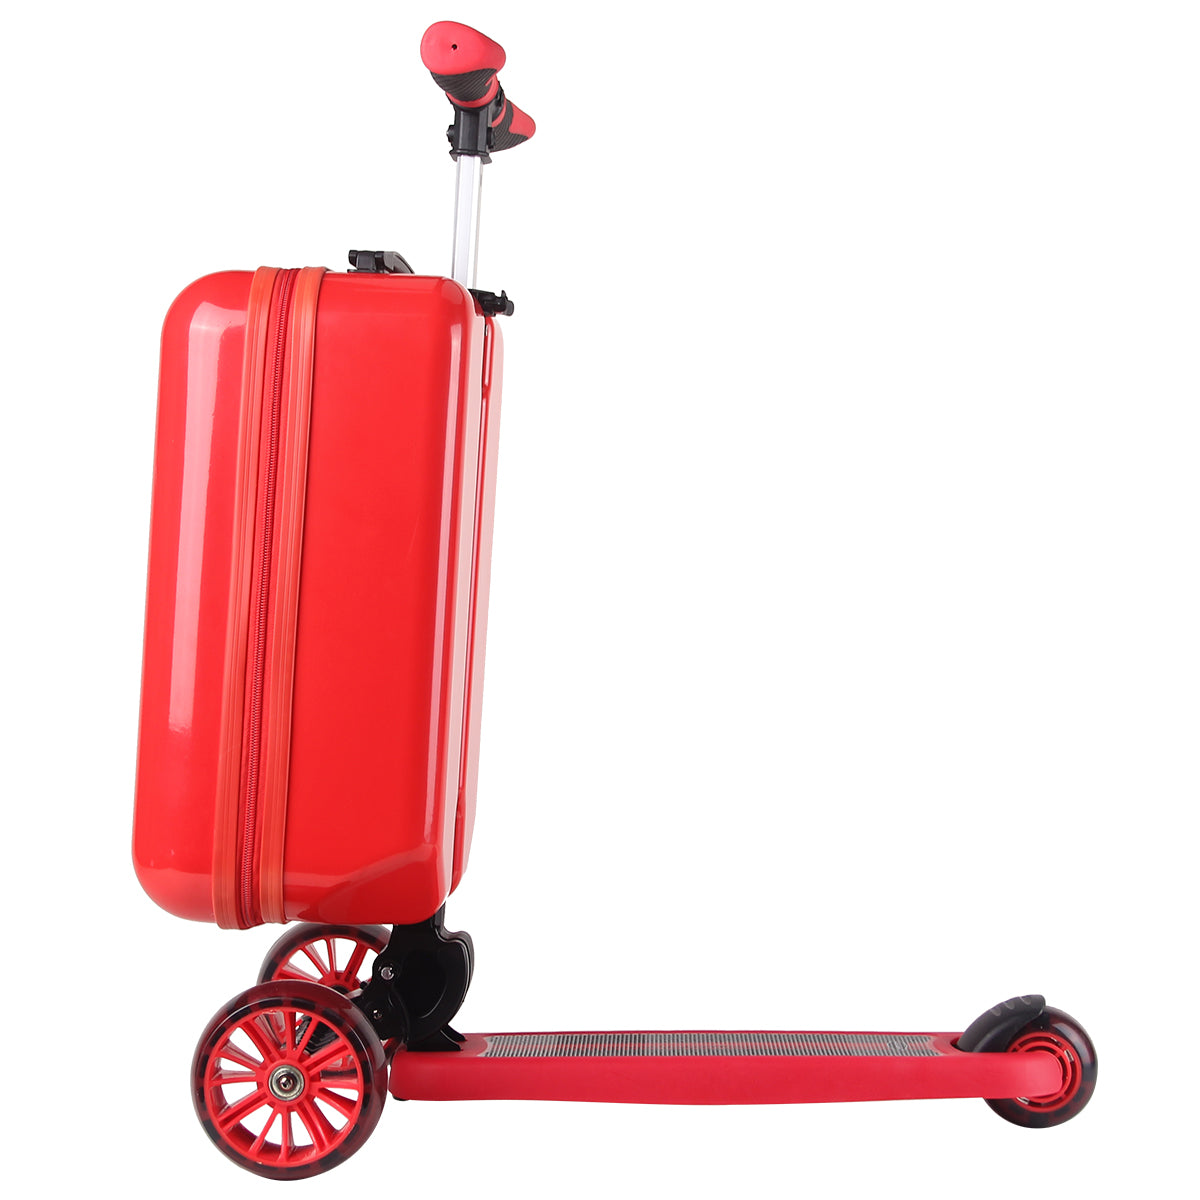 Ferrari - Luggage Foldable Scooter With Adjustable Height